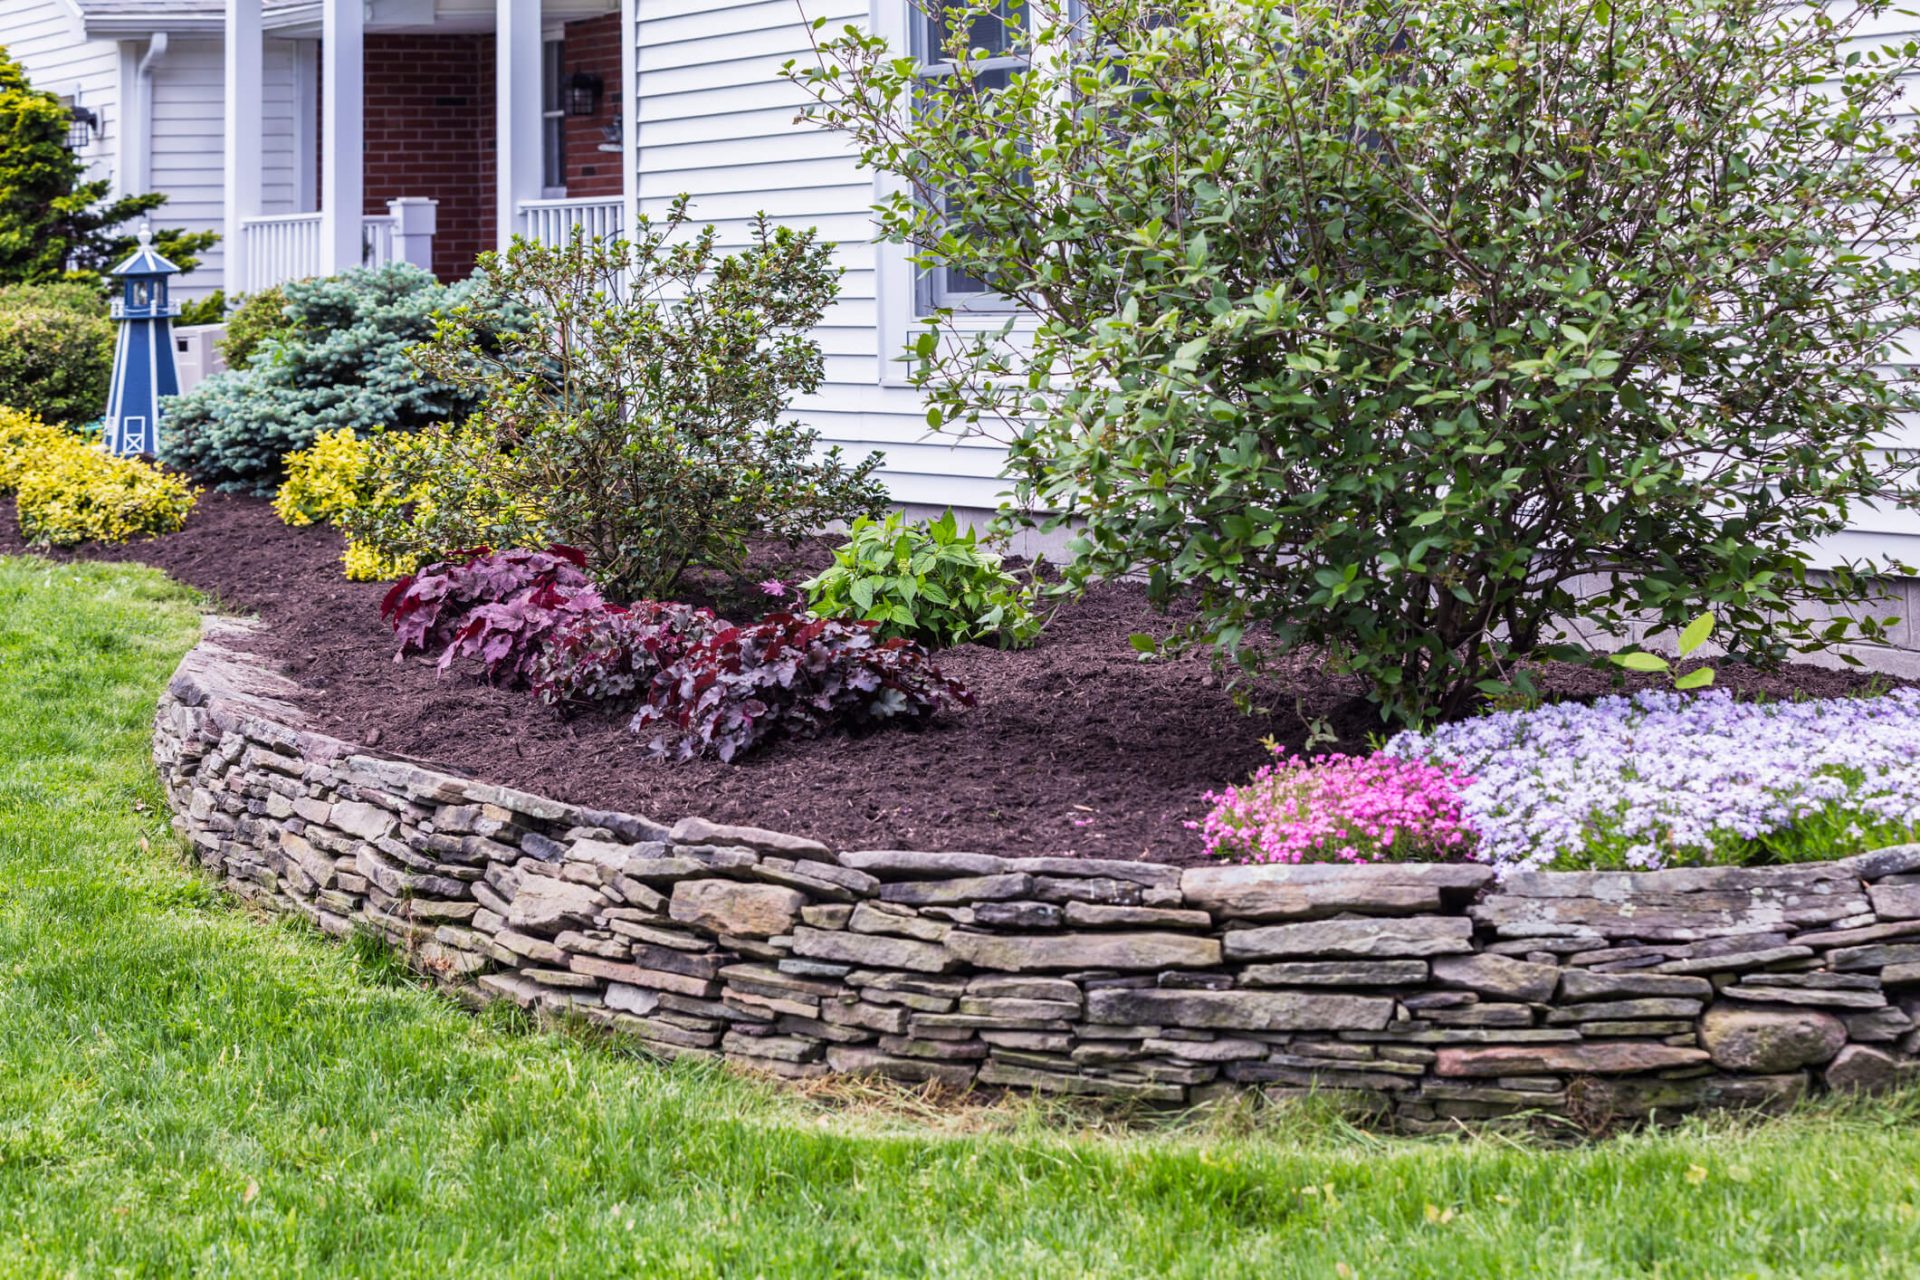 Landscaping 101: Why Should I Mulch?